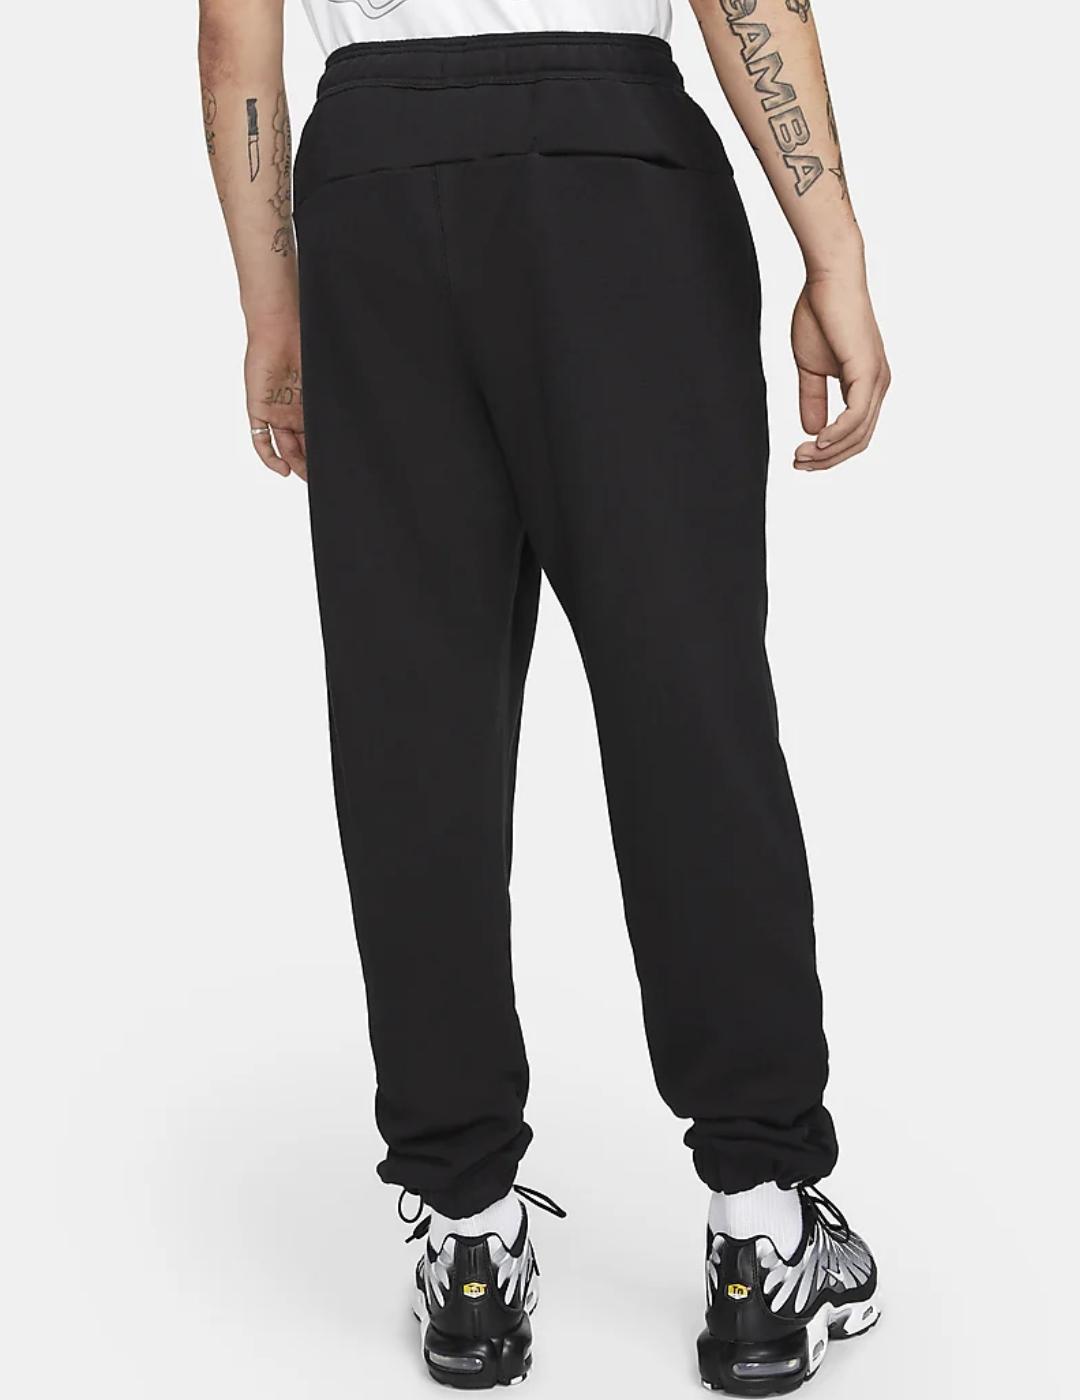 Joggers Nike Air French Terry para Hombre color Negro